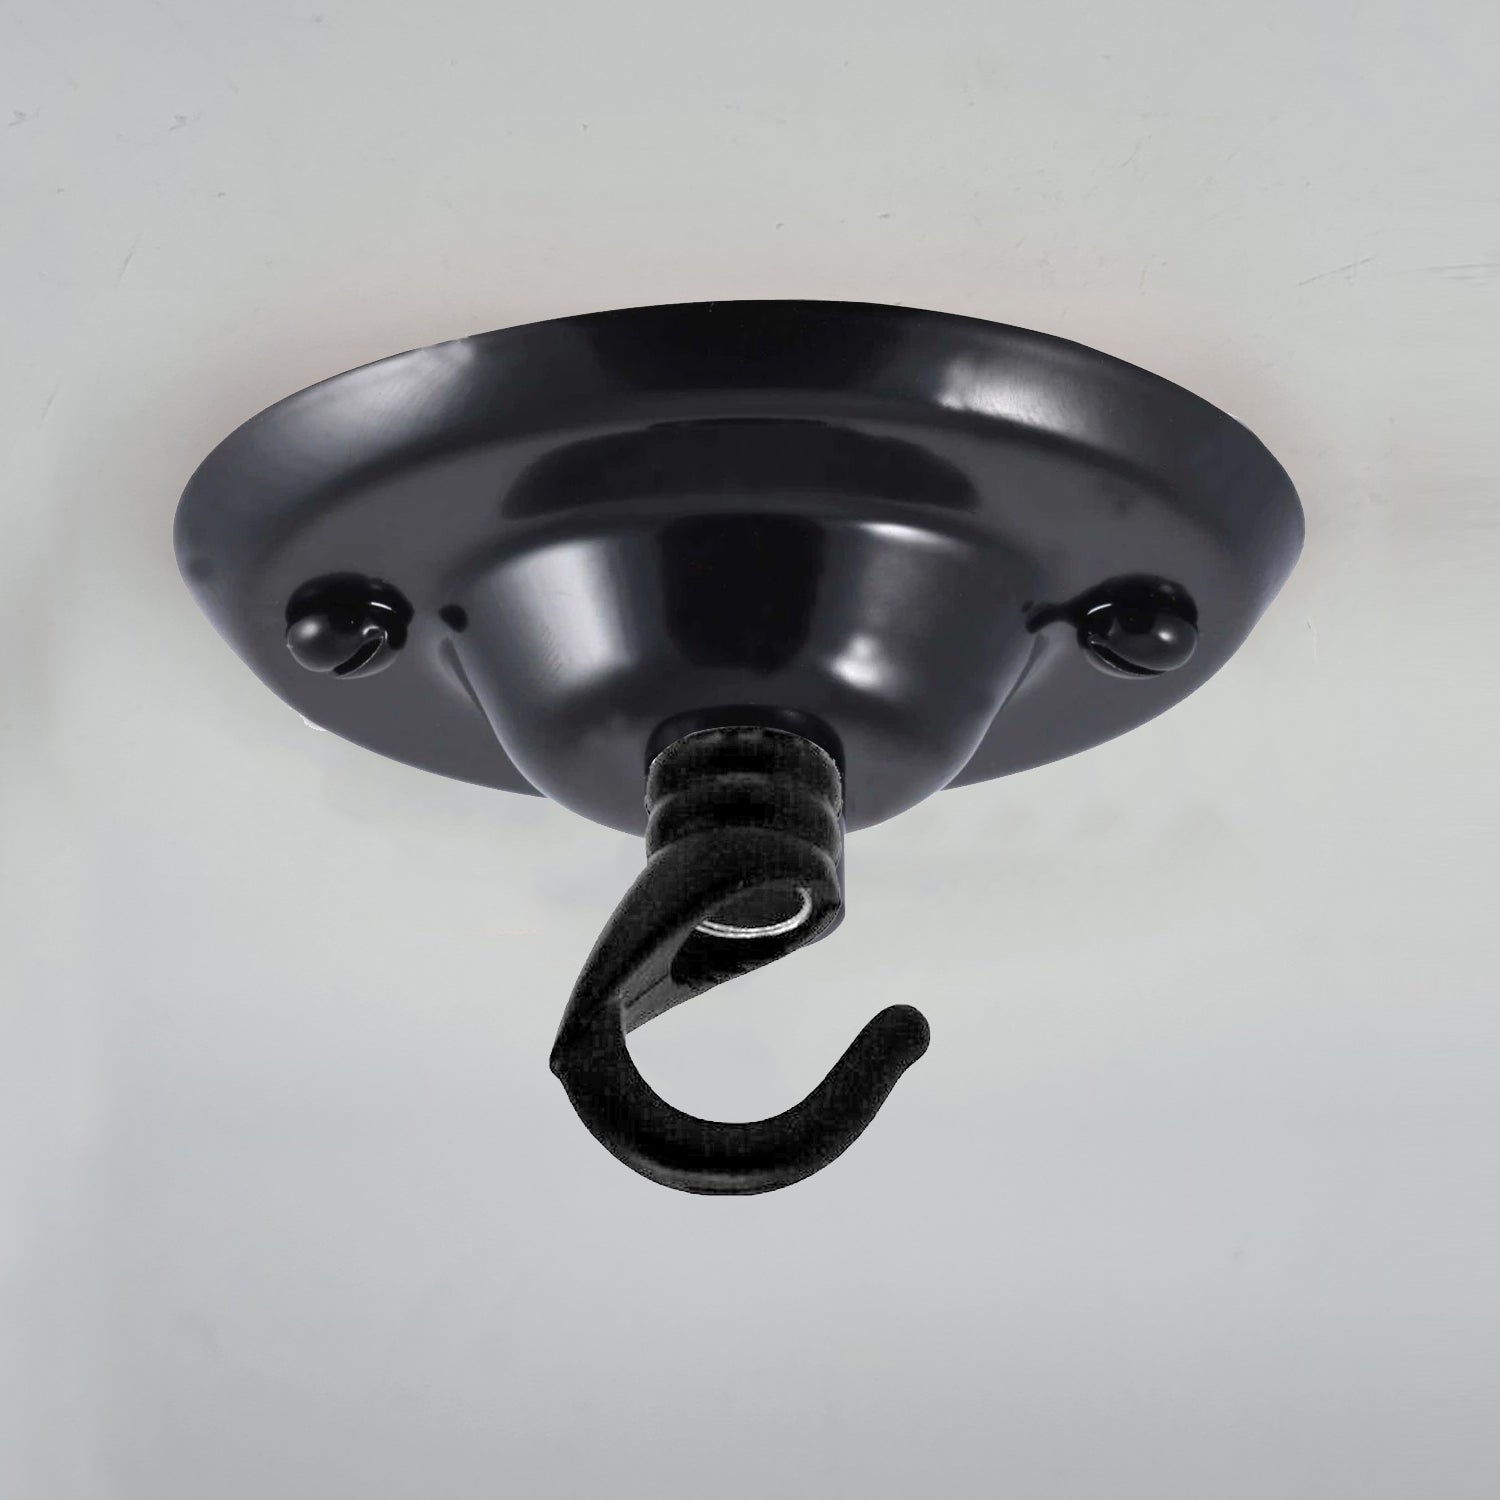 75mm Front Fitting Color Ceiling Hook With Single Point Drop